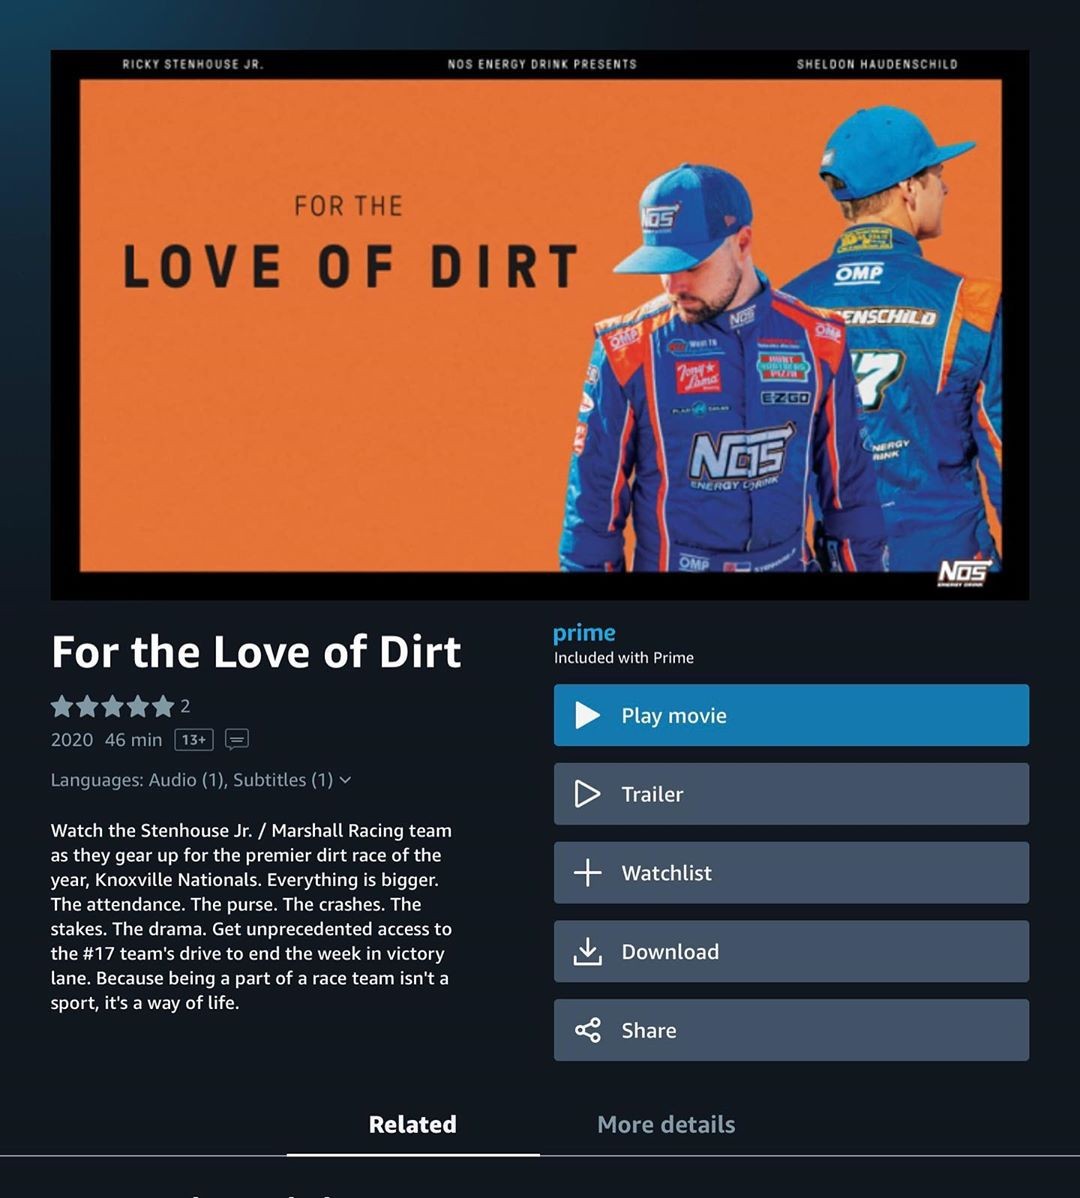 Looking for some action? For the Love of Dirt Documentary now available on Amazon Prime Video. @NosEnergyDrink